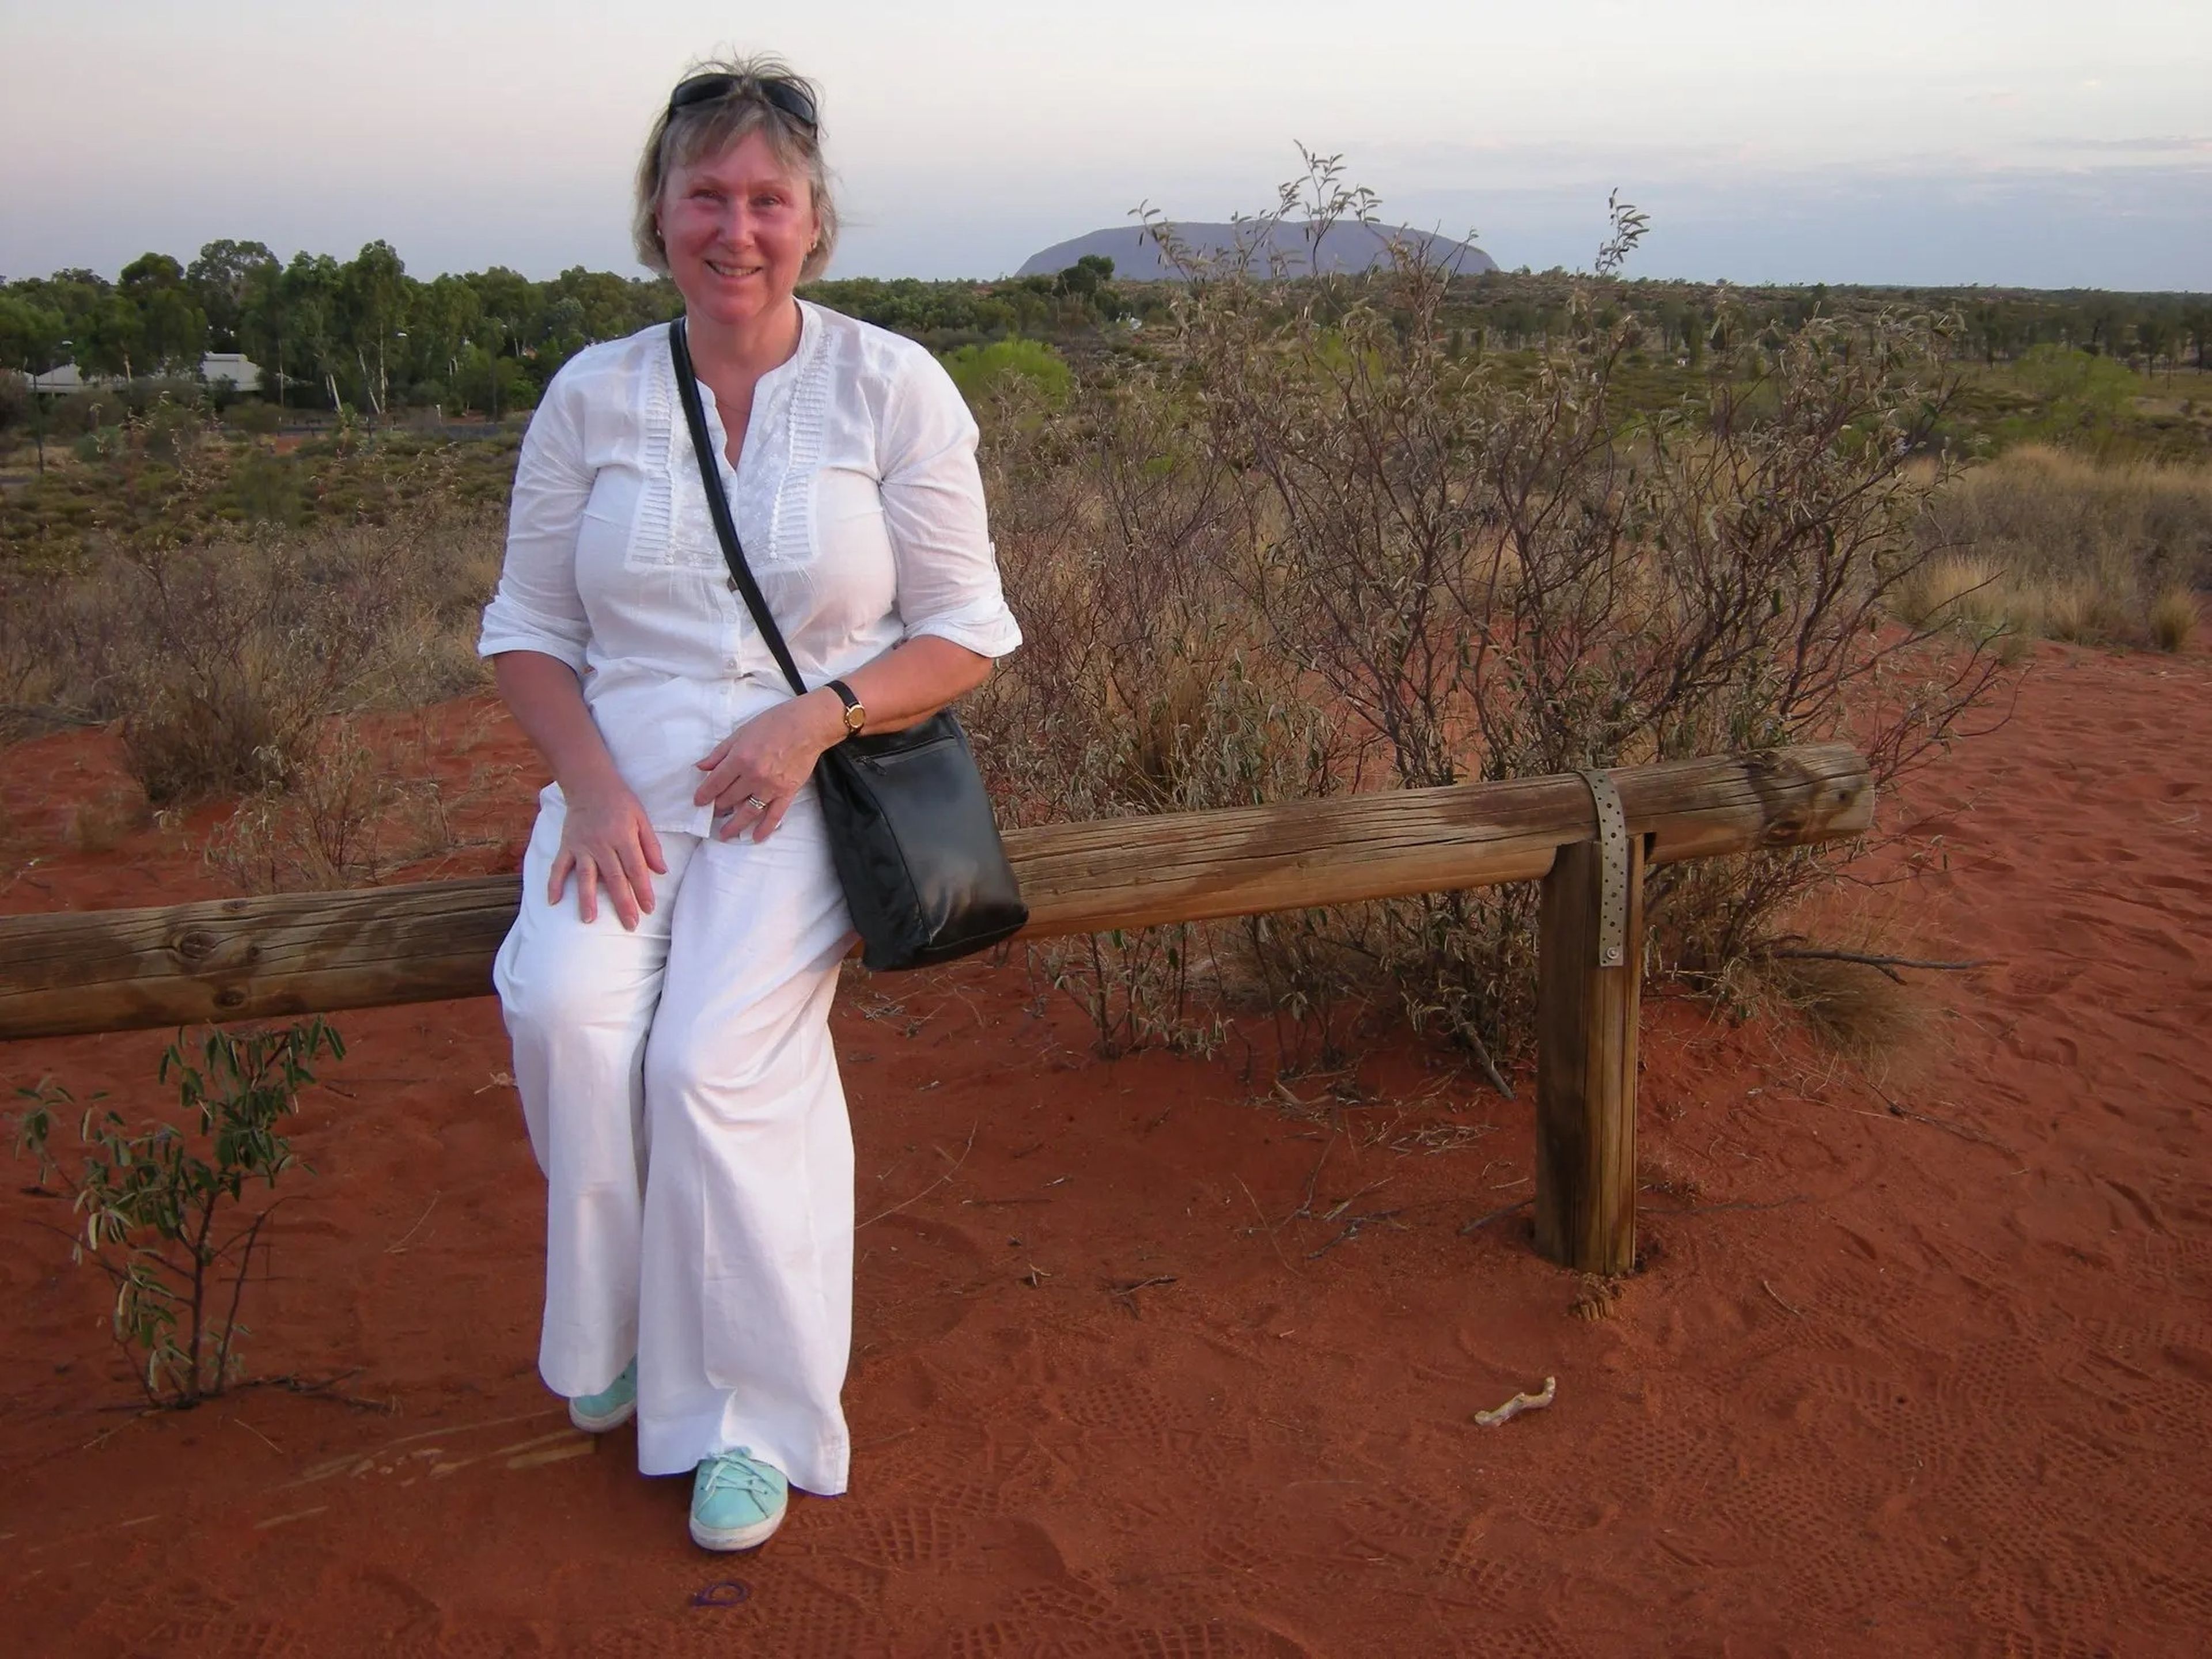 Julie Williams poses in the Australian Outback